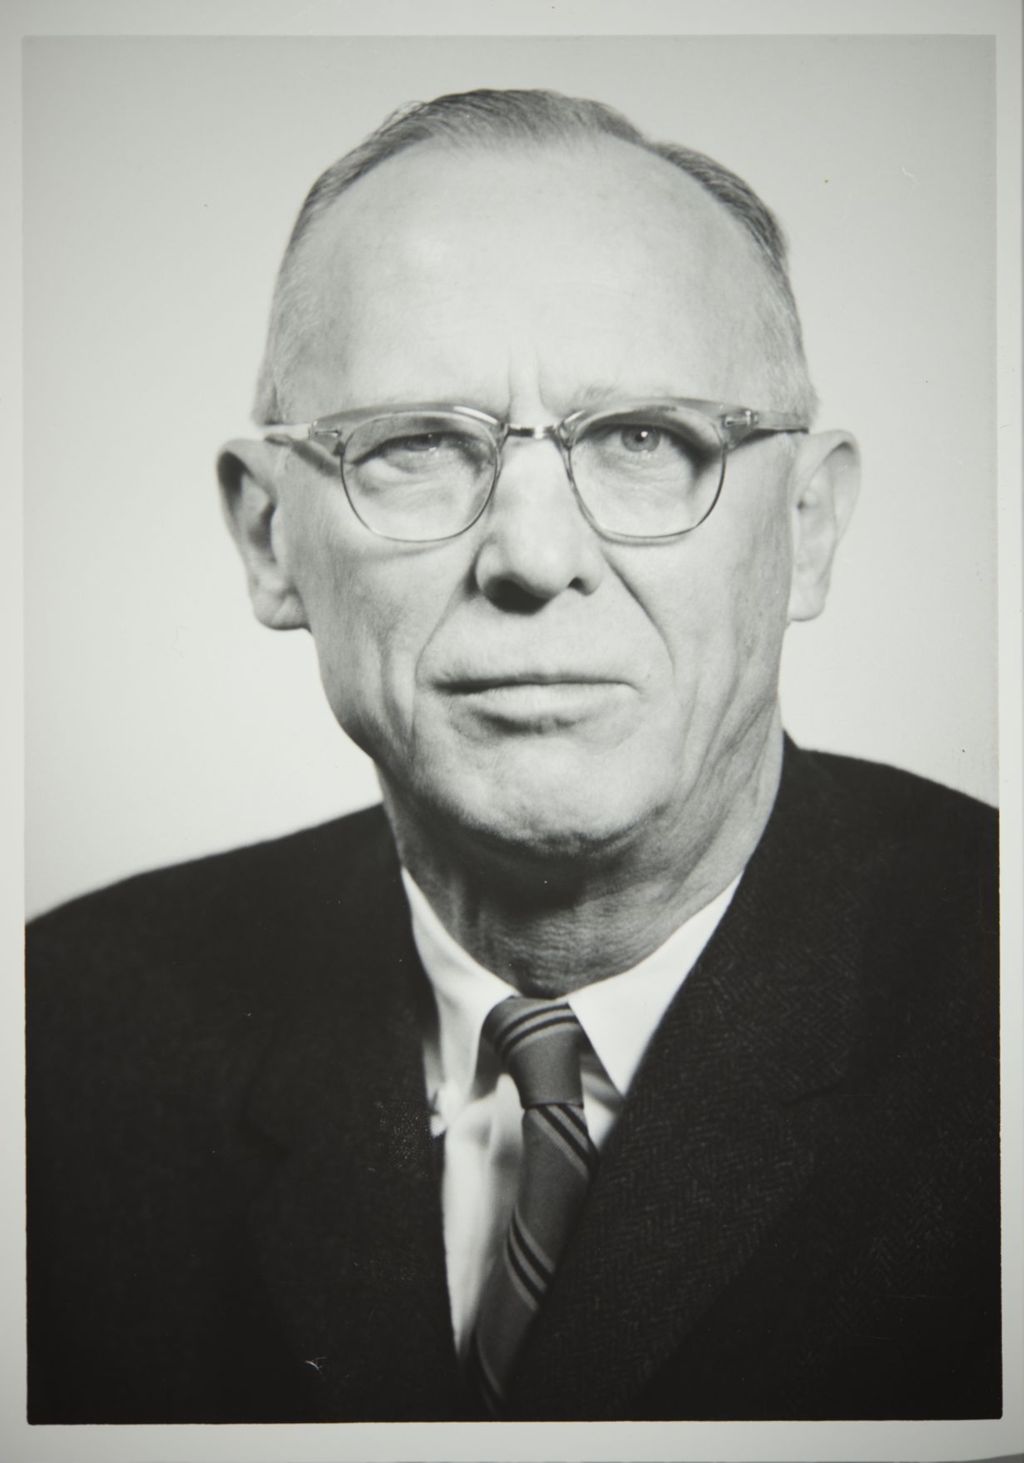 Miniature of Board of Trustees member, and University of Illinois Executive Vice President and Provost Lyle H. Lanier